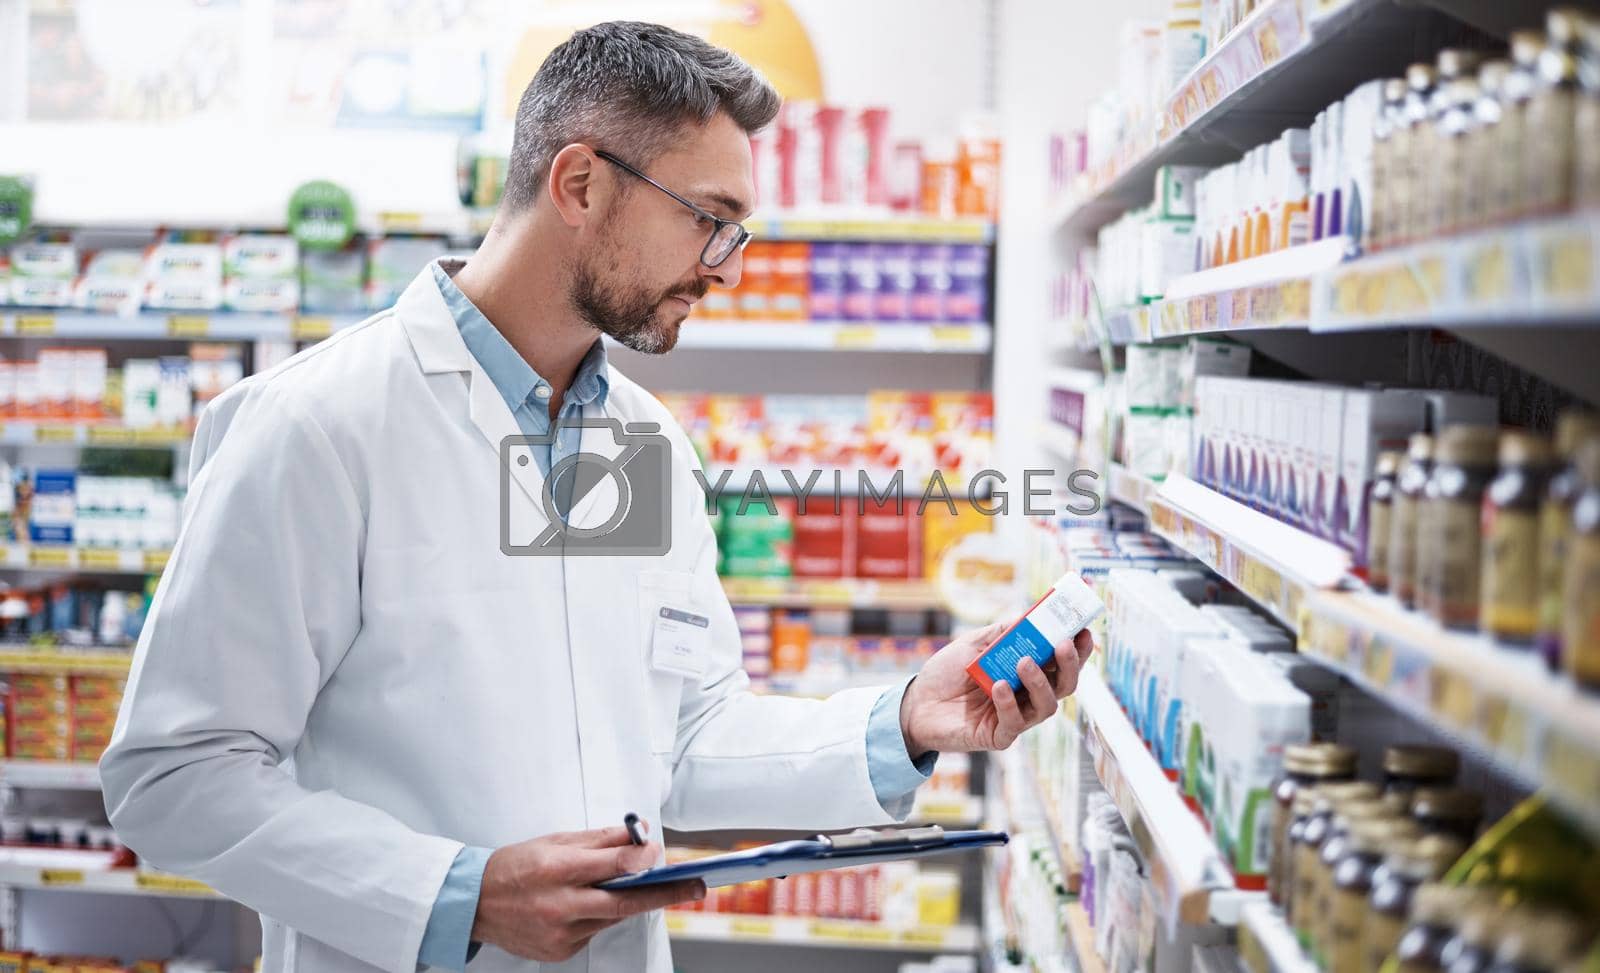 Royalty free image of Stocking the shelves is top priority. Shot of a mature pharmacist doing inventory in a pharmacy. by YuriArcurs